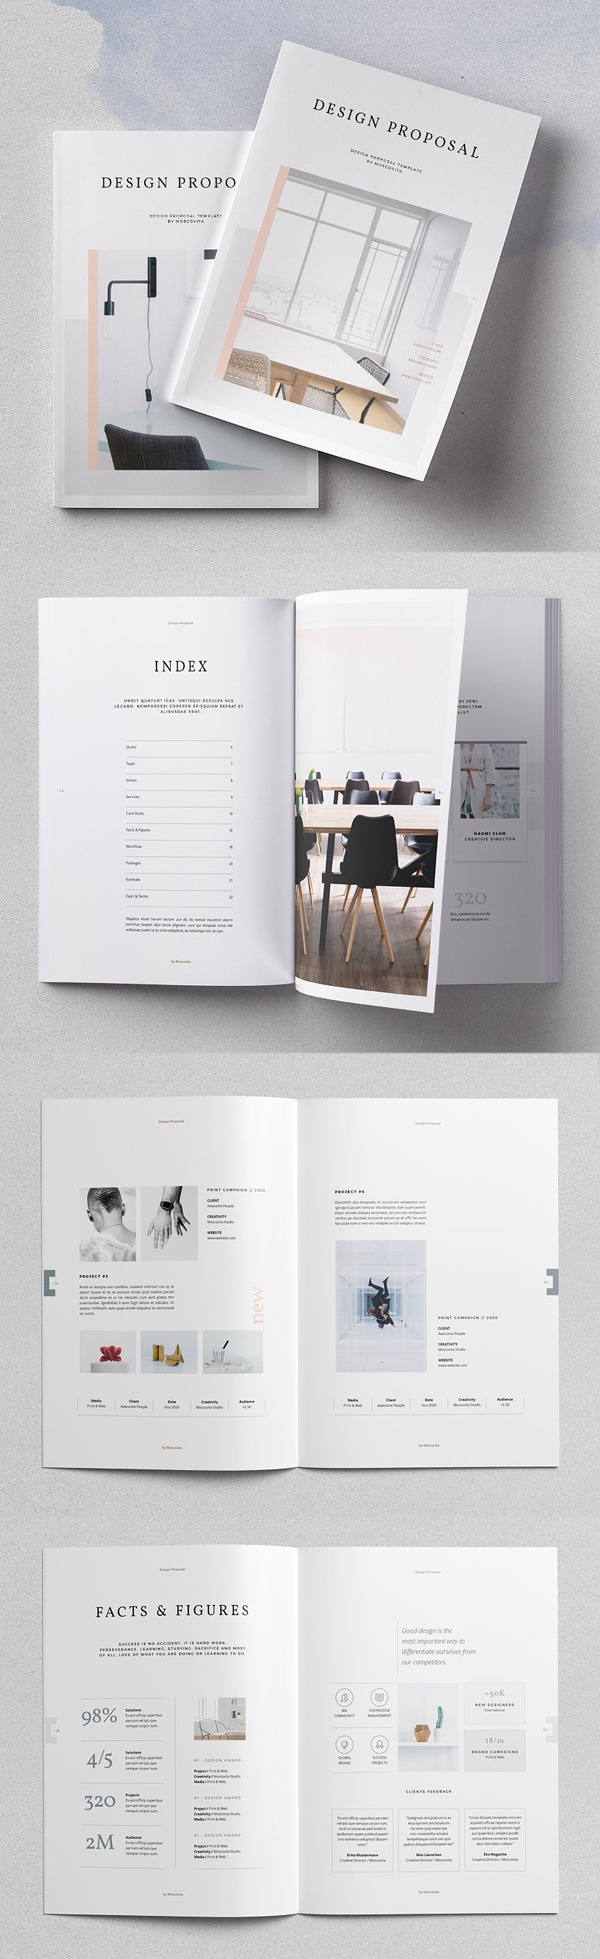 Business Proposal Templates | Design | Graphic Design Junction Within Graphic Design Proposal Template